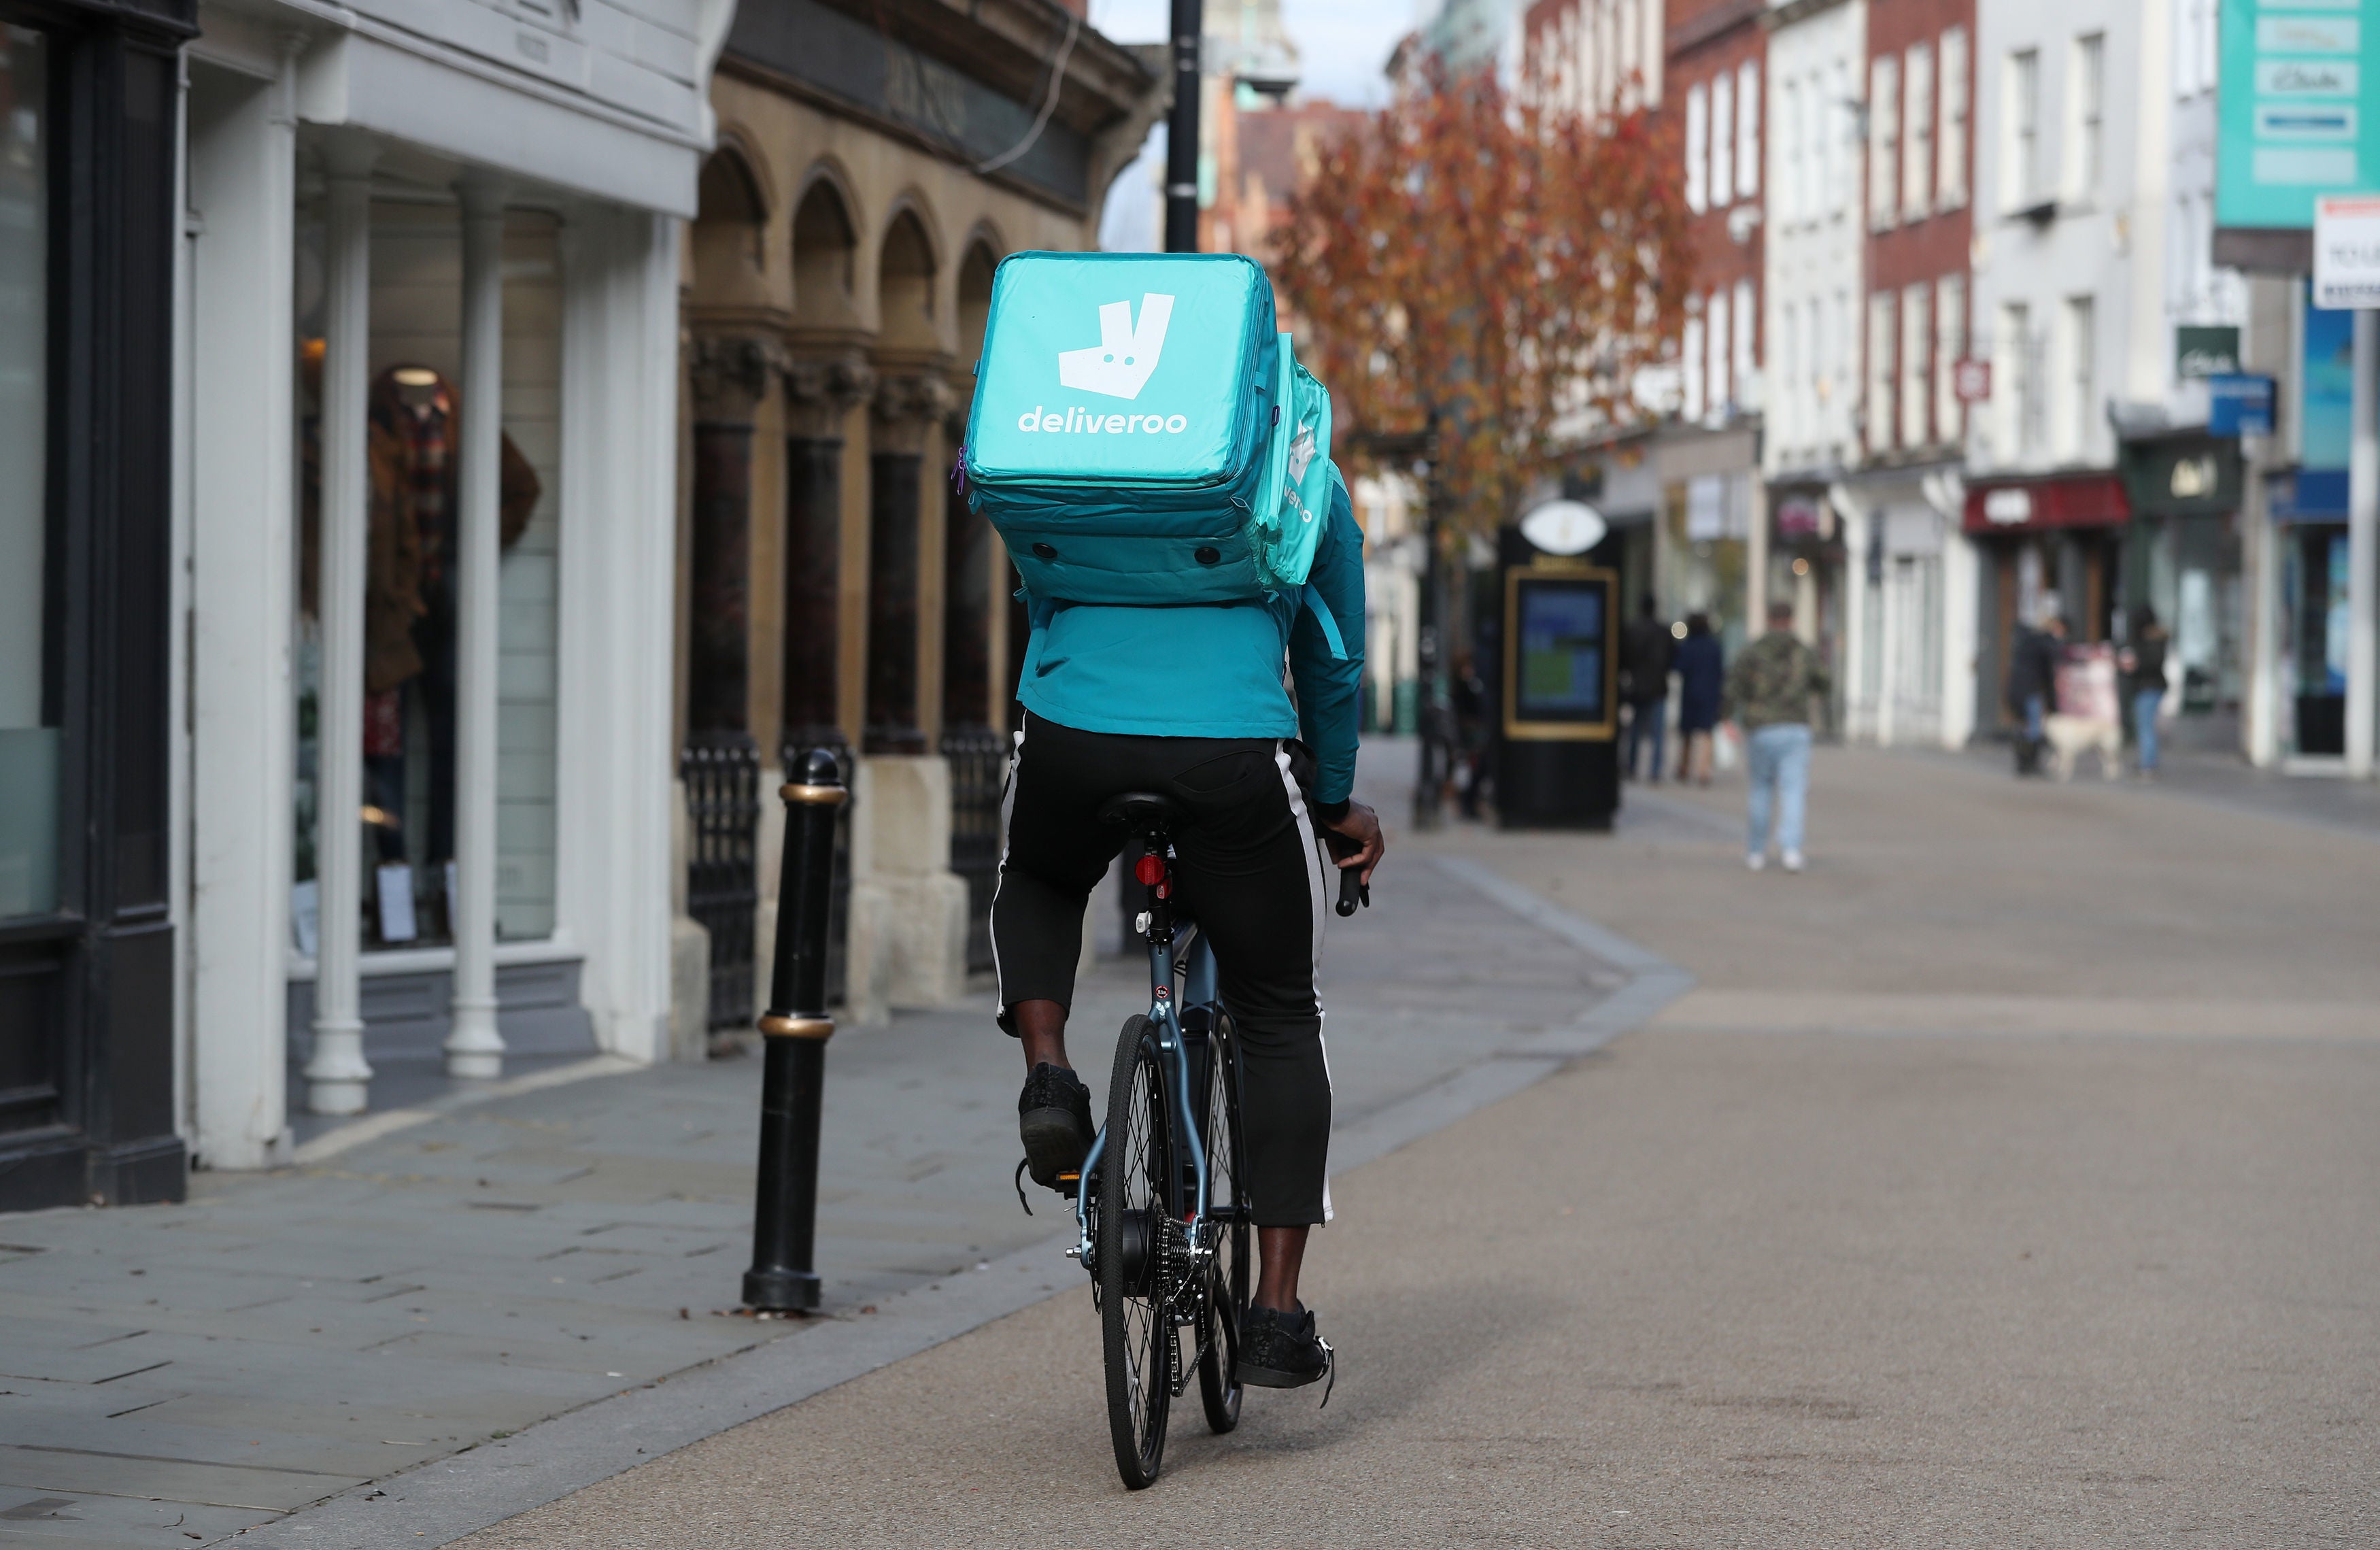 Deliveroo riders are classed as self-employed